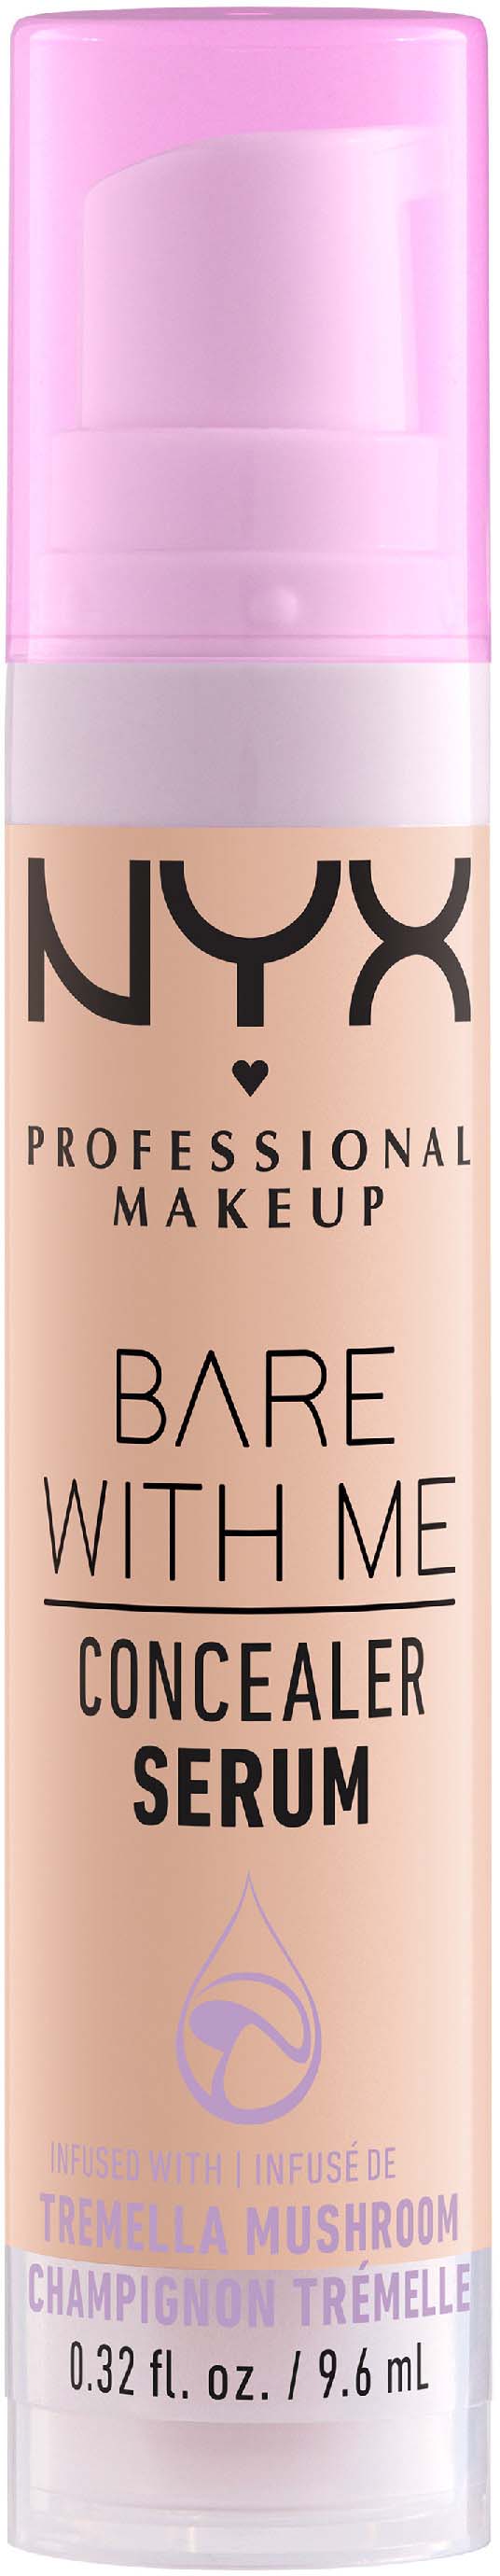 NYX PROFESSIONAL MAKEUP Bare With Light Serum Me Concealer